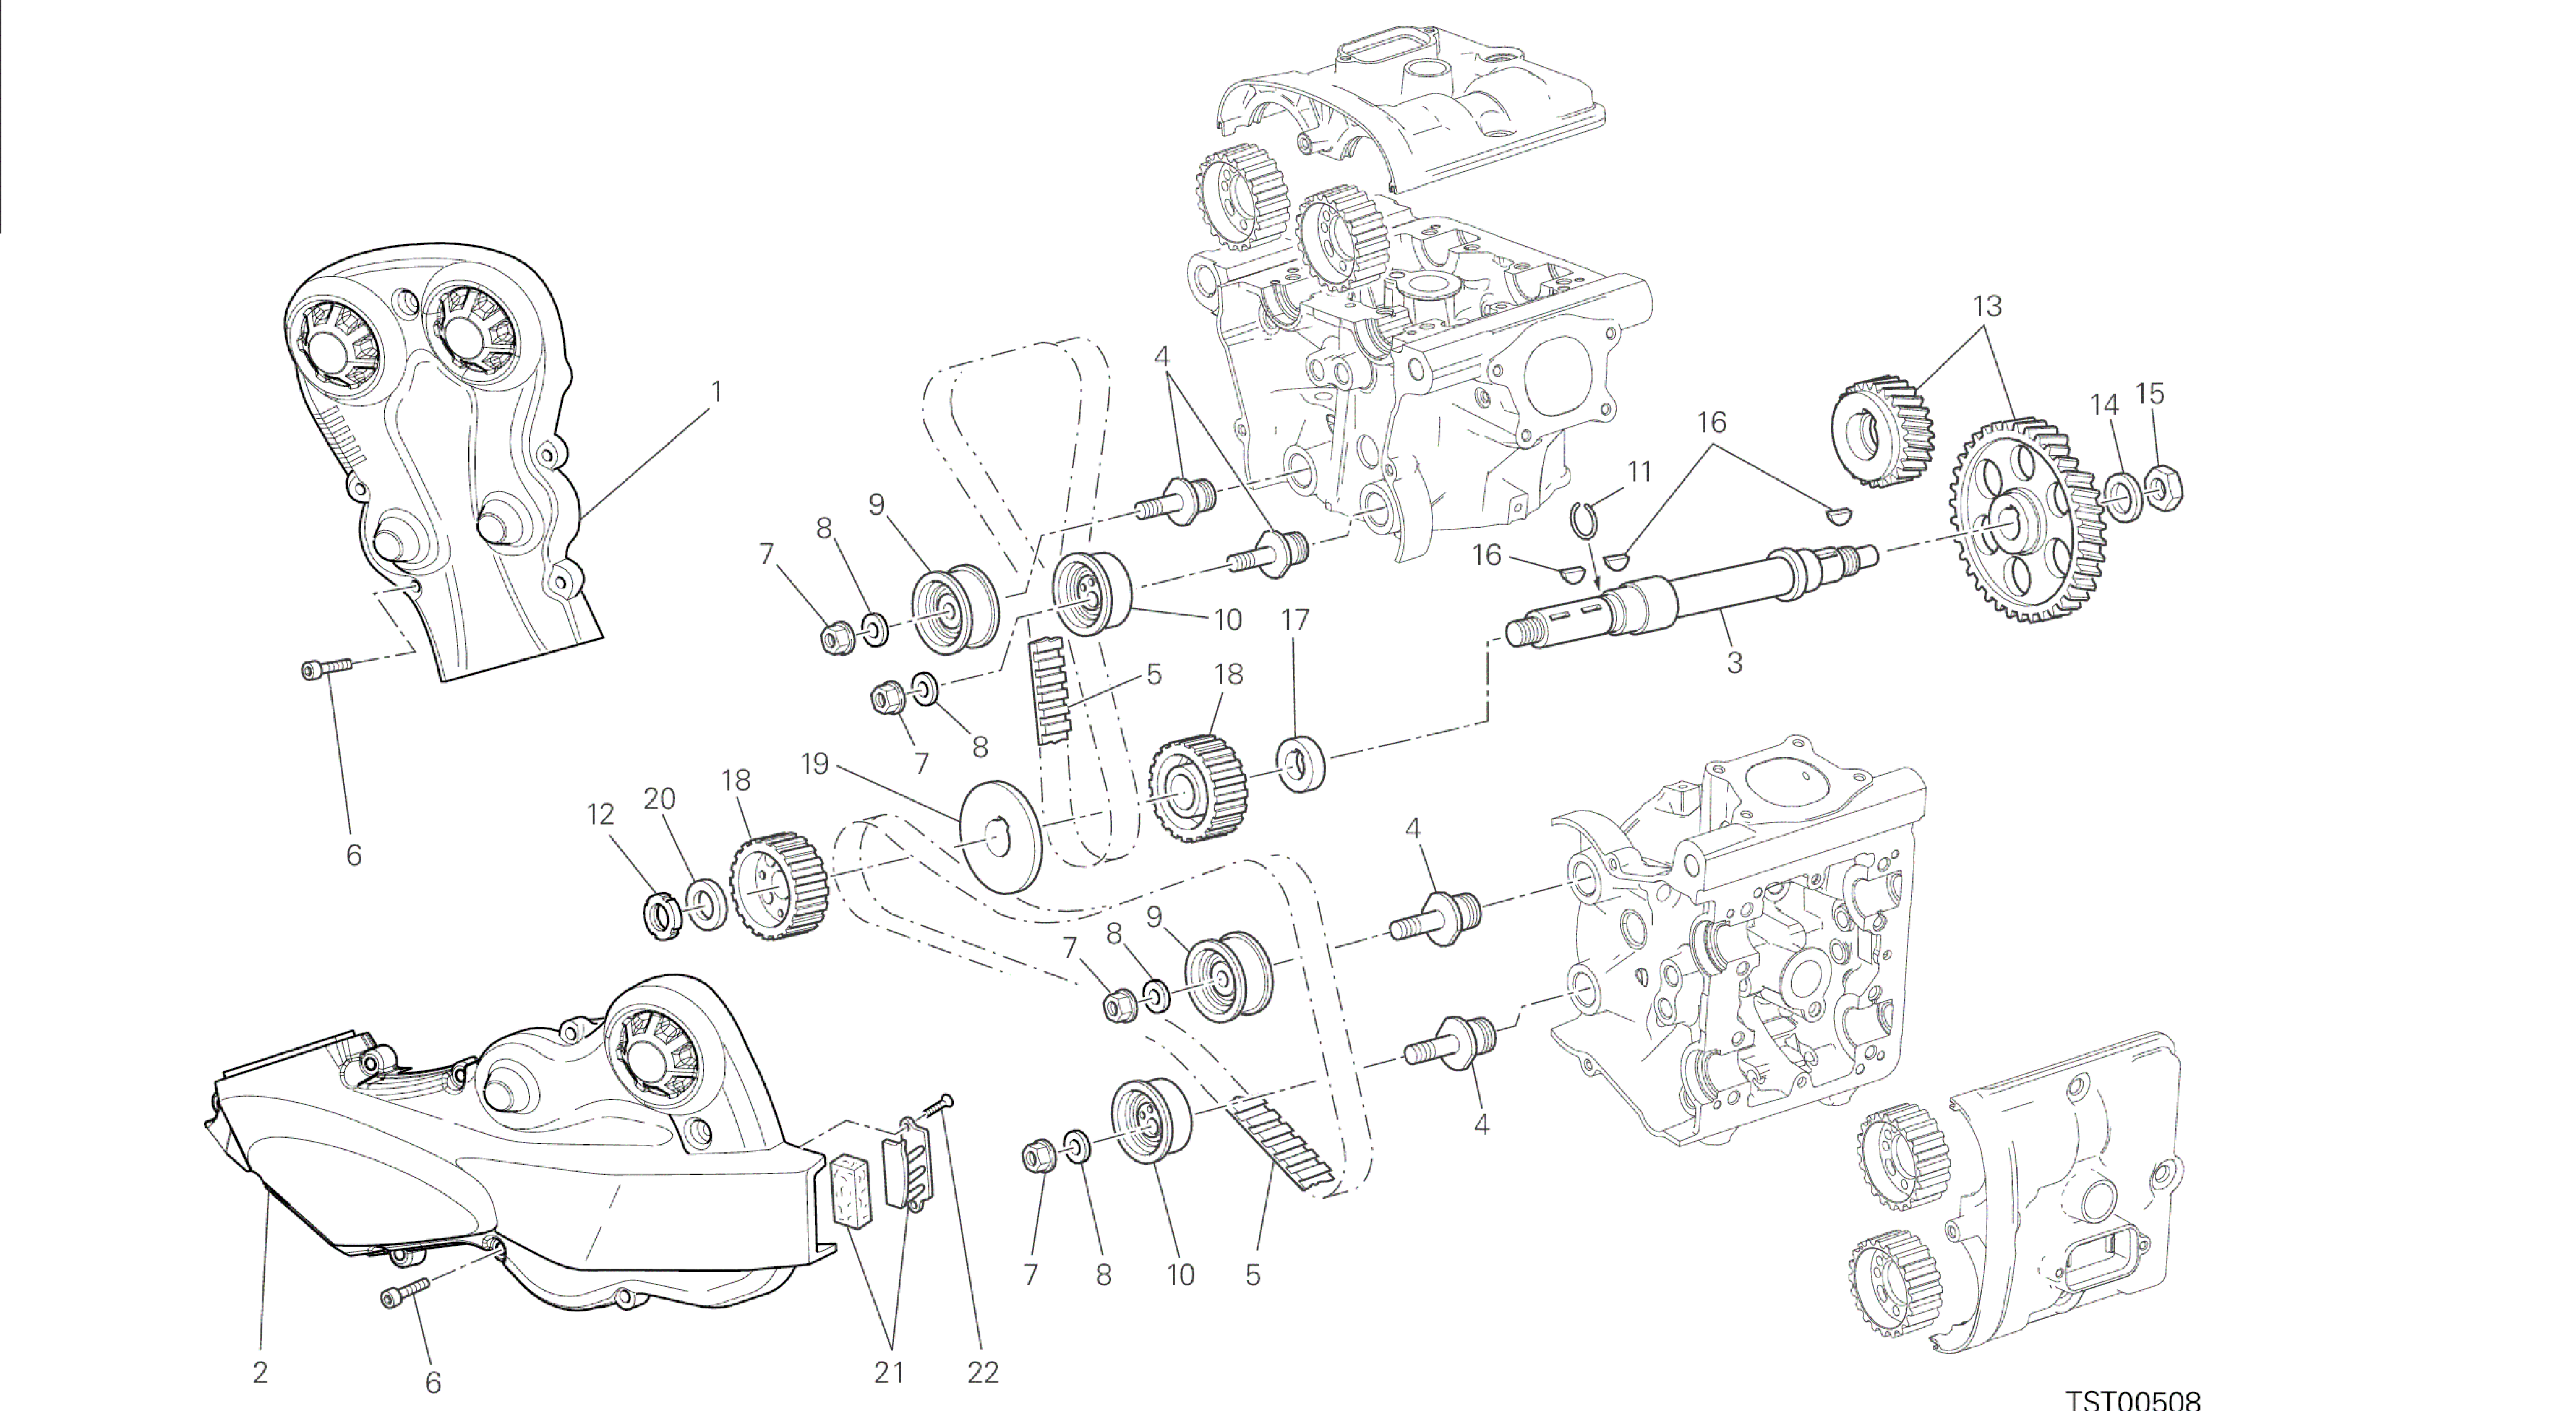 DRAWING 008 - DISTRIBUZIONE [MOD:M 1200S]GROUP ENGINE